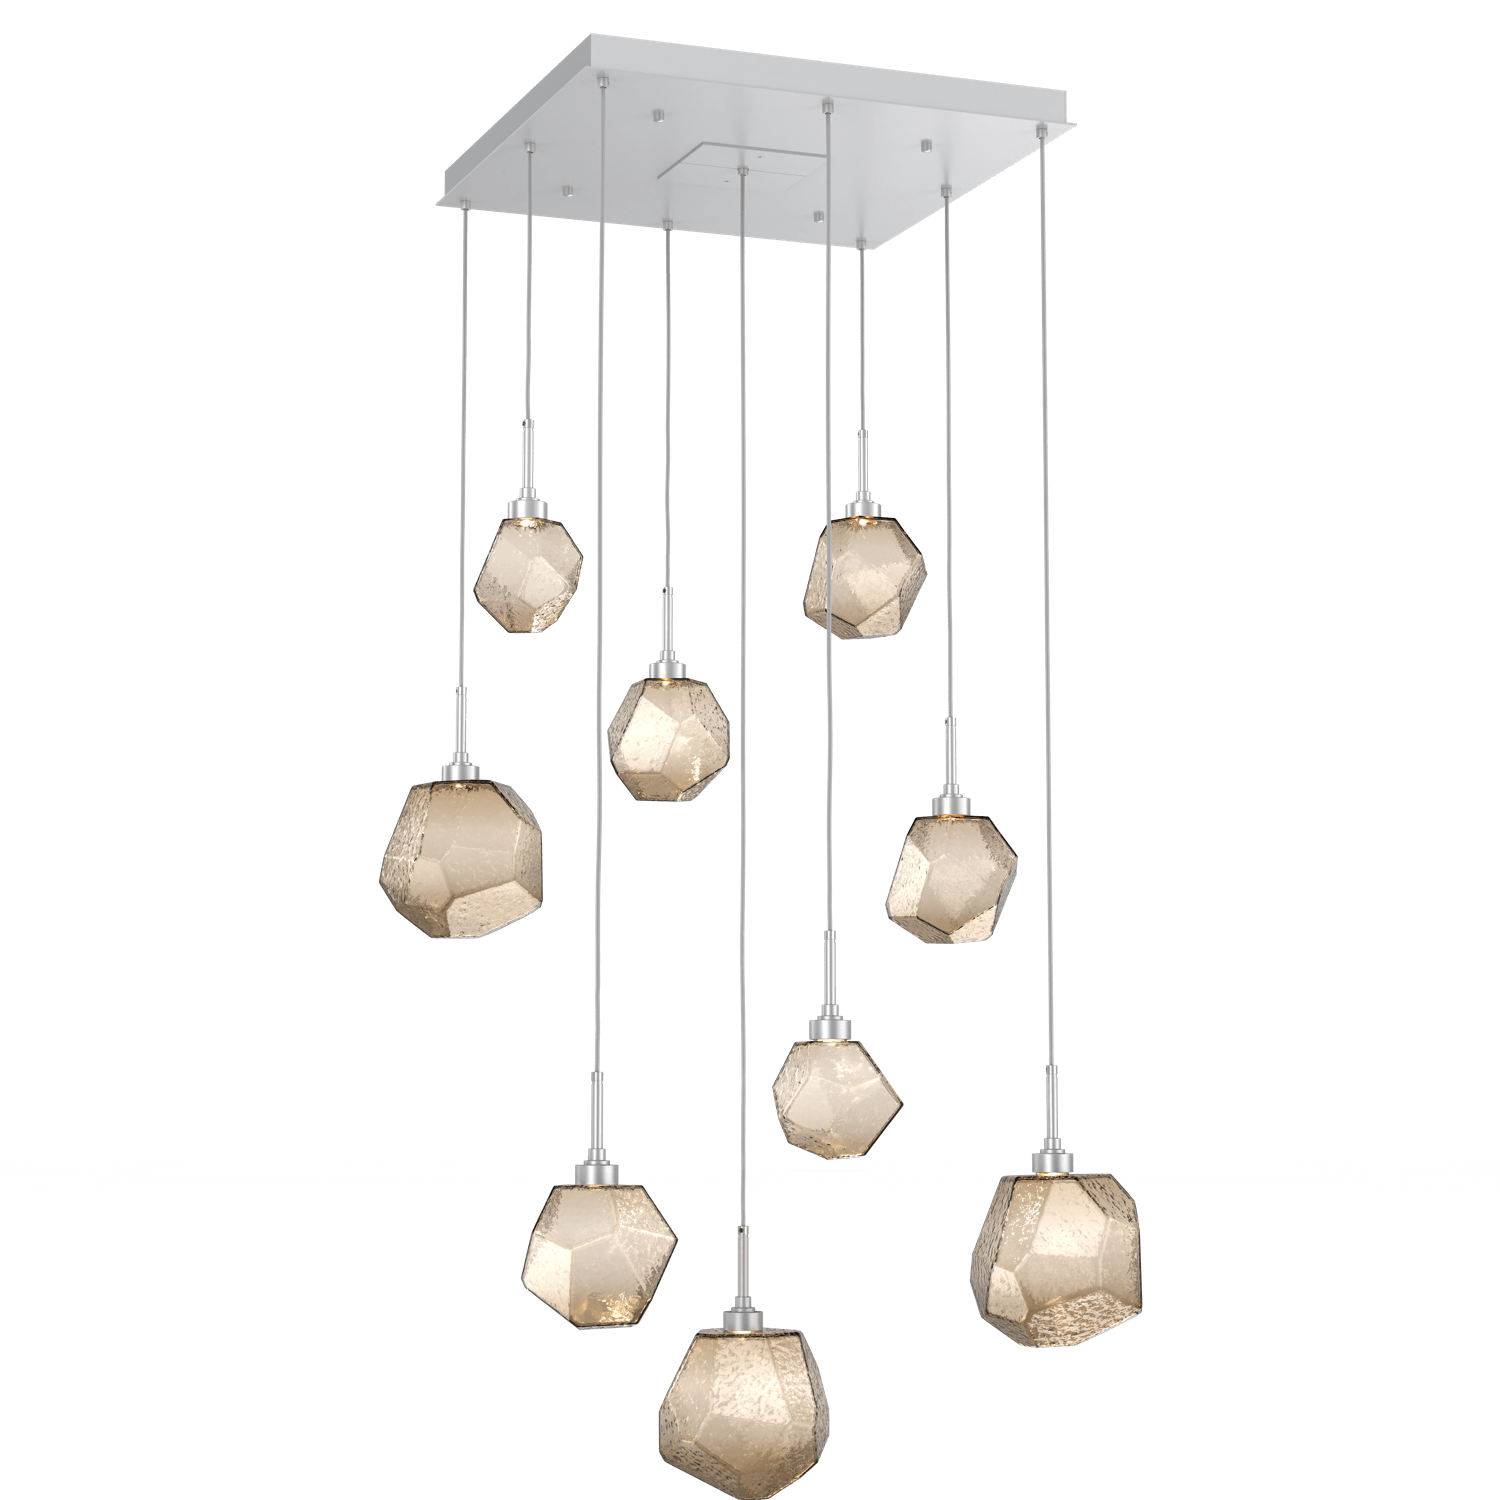 CHB0039-09-CS-B-Hammerton-Studio-Gem-9-light-square-pendant-chandelier-with-classic-silver-finish-and-bronze-blown-glass-shades-and-LED-lamping